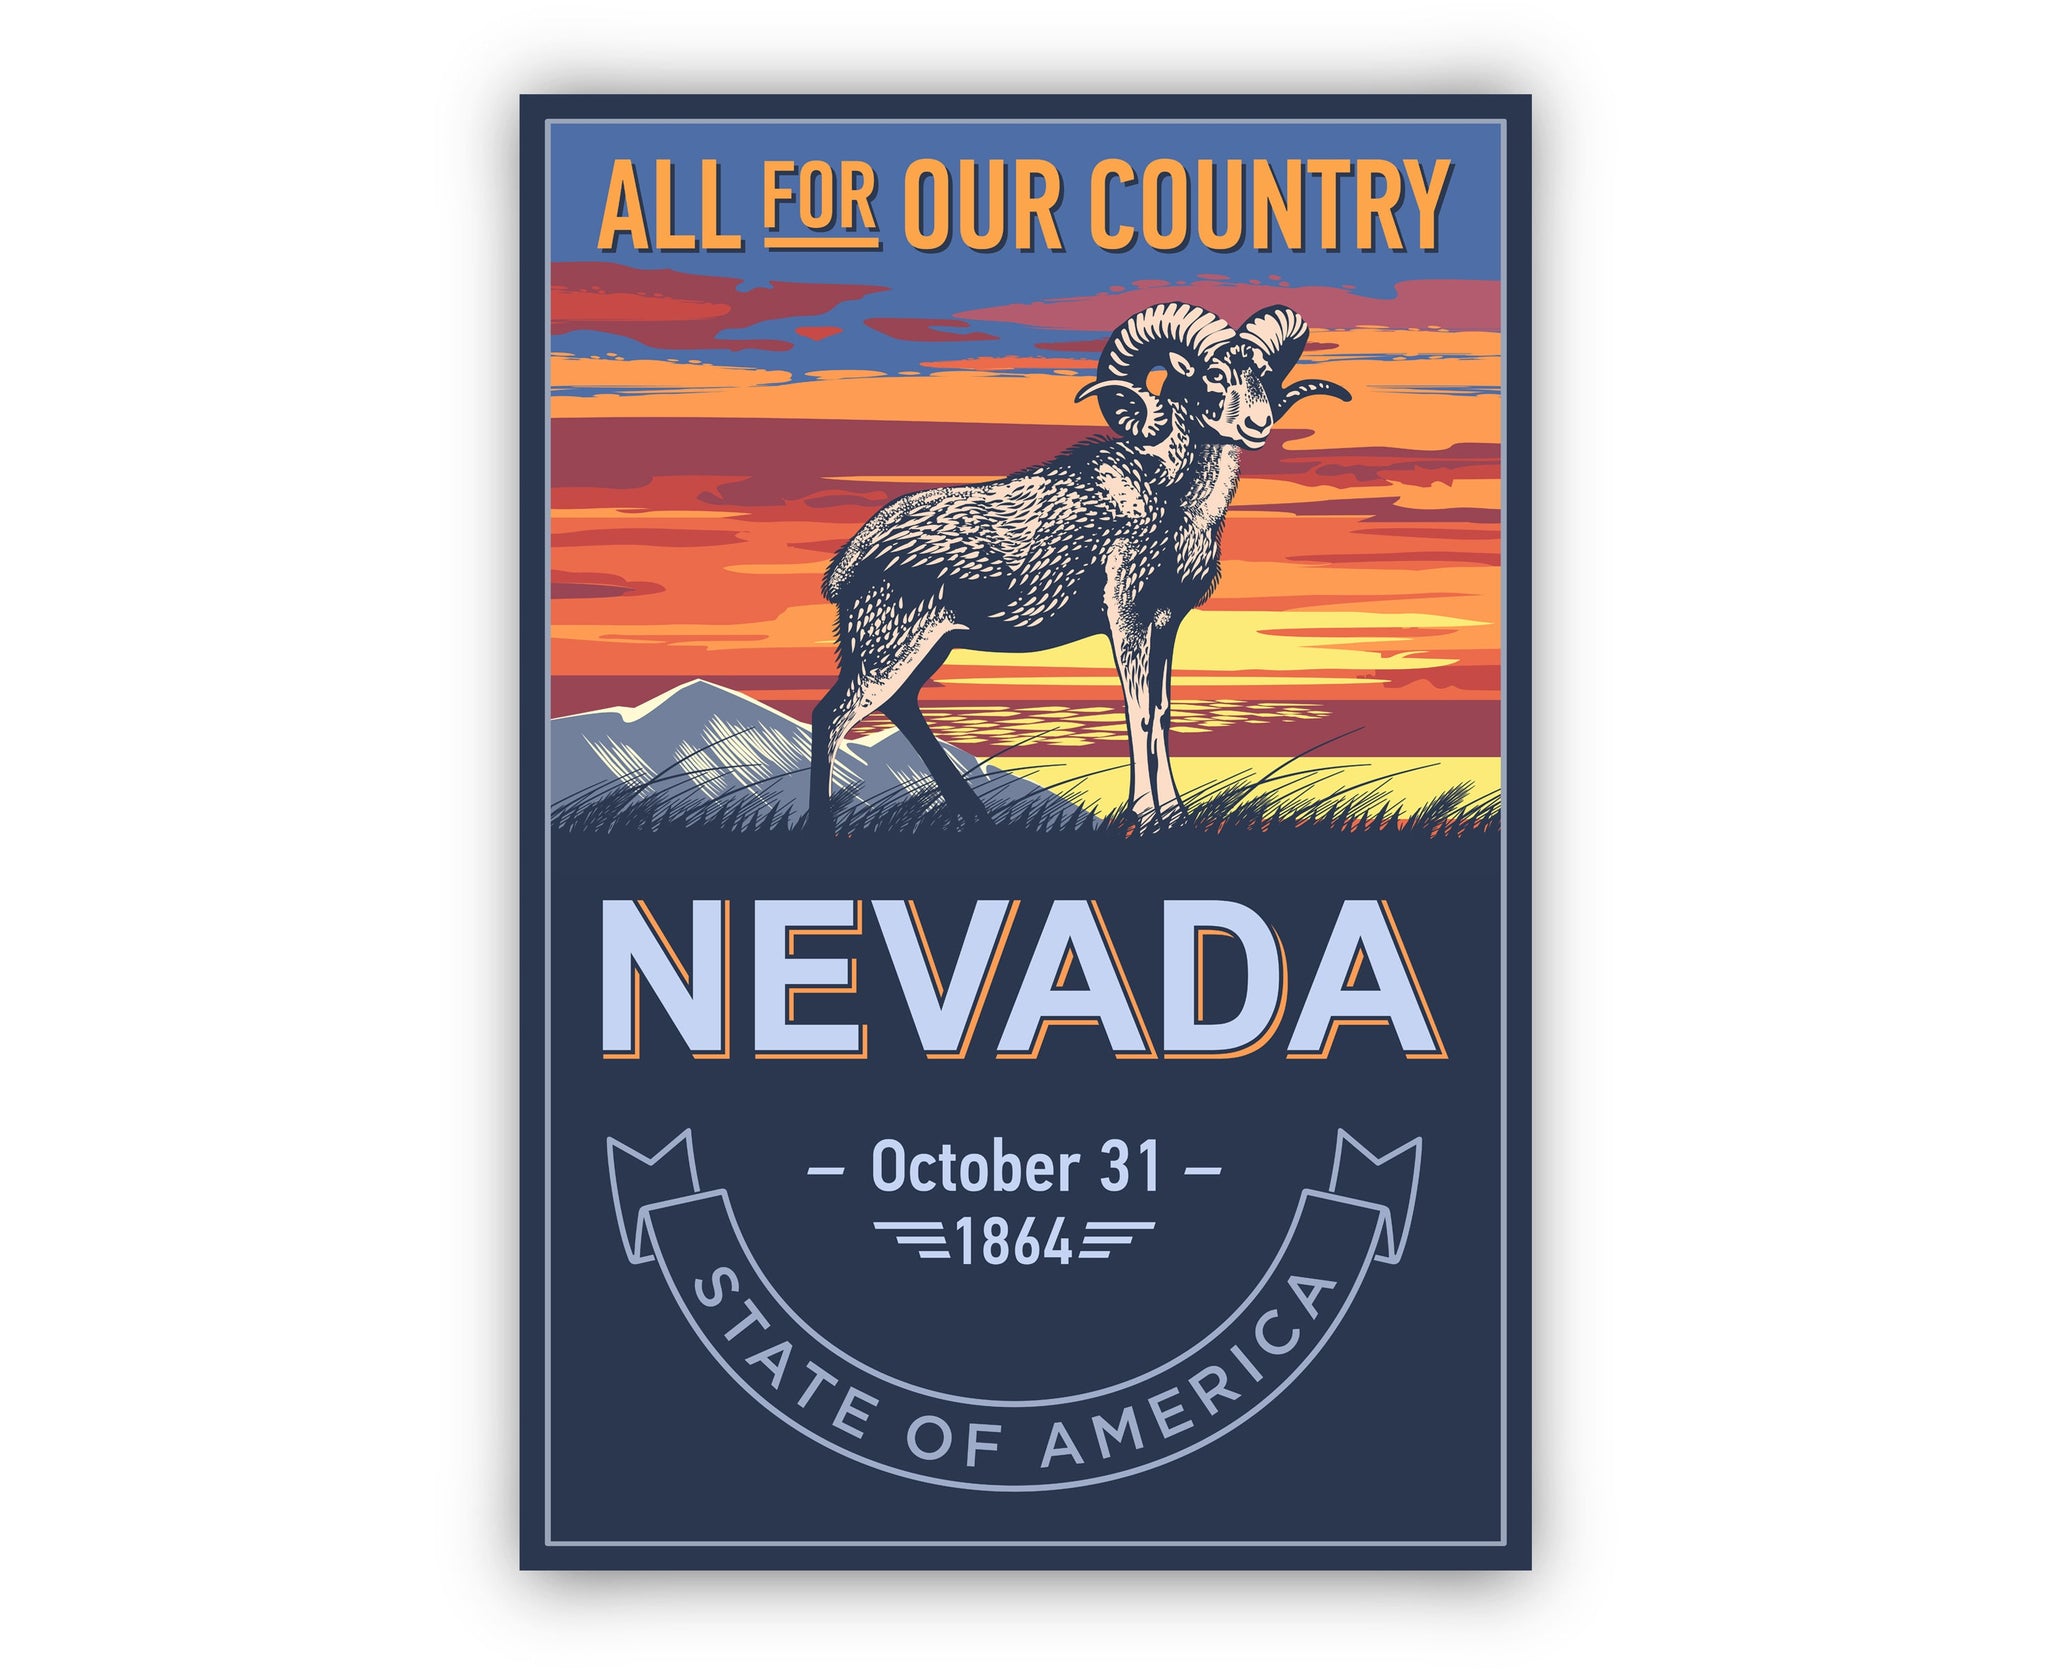 United States Poster, Nevada State Poster Print, Nevada State Emblem Poster, Retro Travel State Poster, Home Wall Art, Office Wall Art